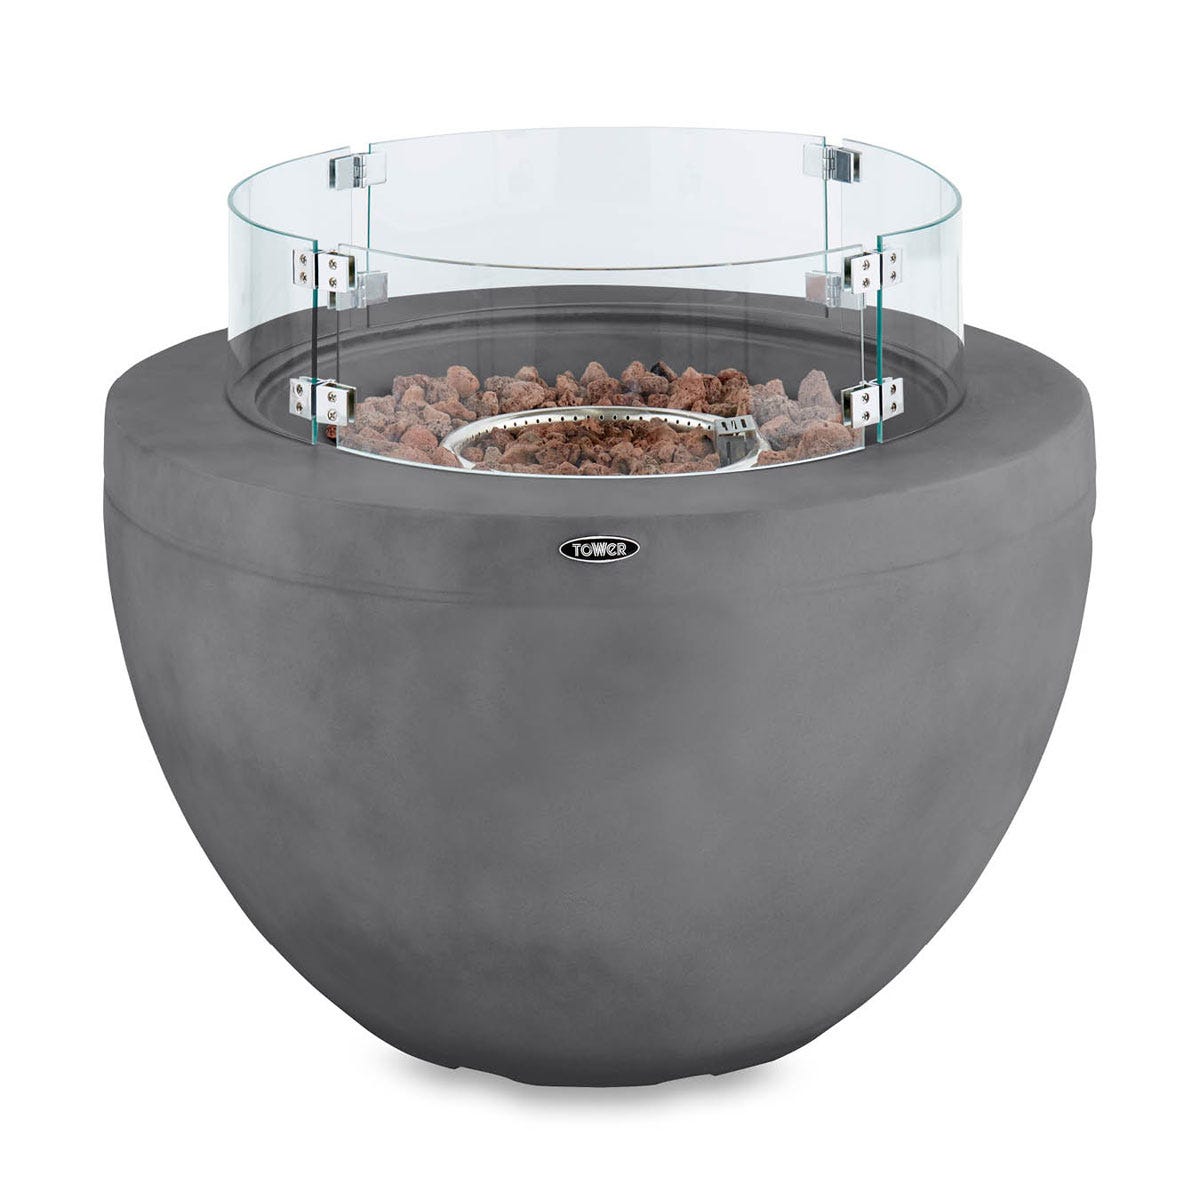 Tower Magna Round Gas Fire Pit | T978527 - 6924